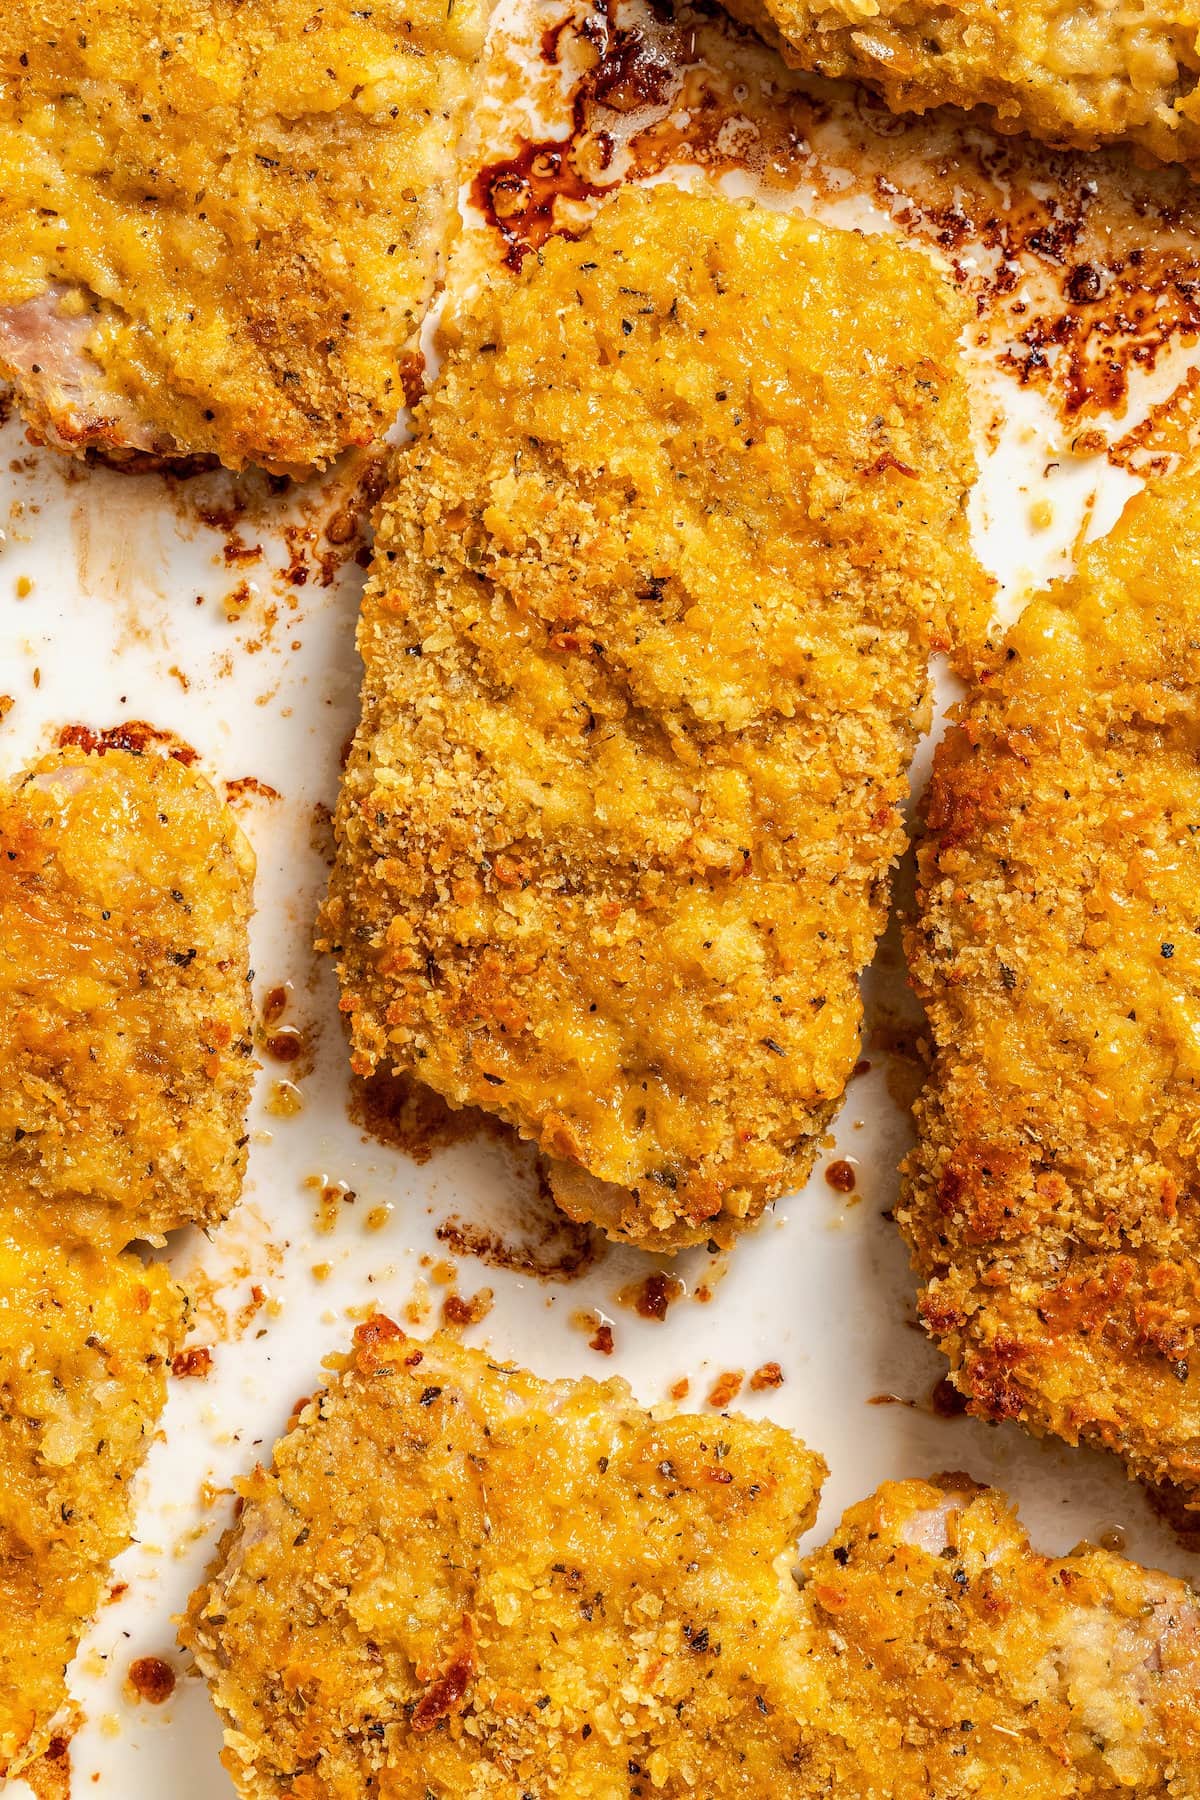 Baked breaded pork chops fresh out of the oven.